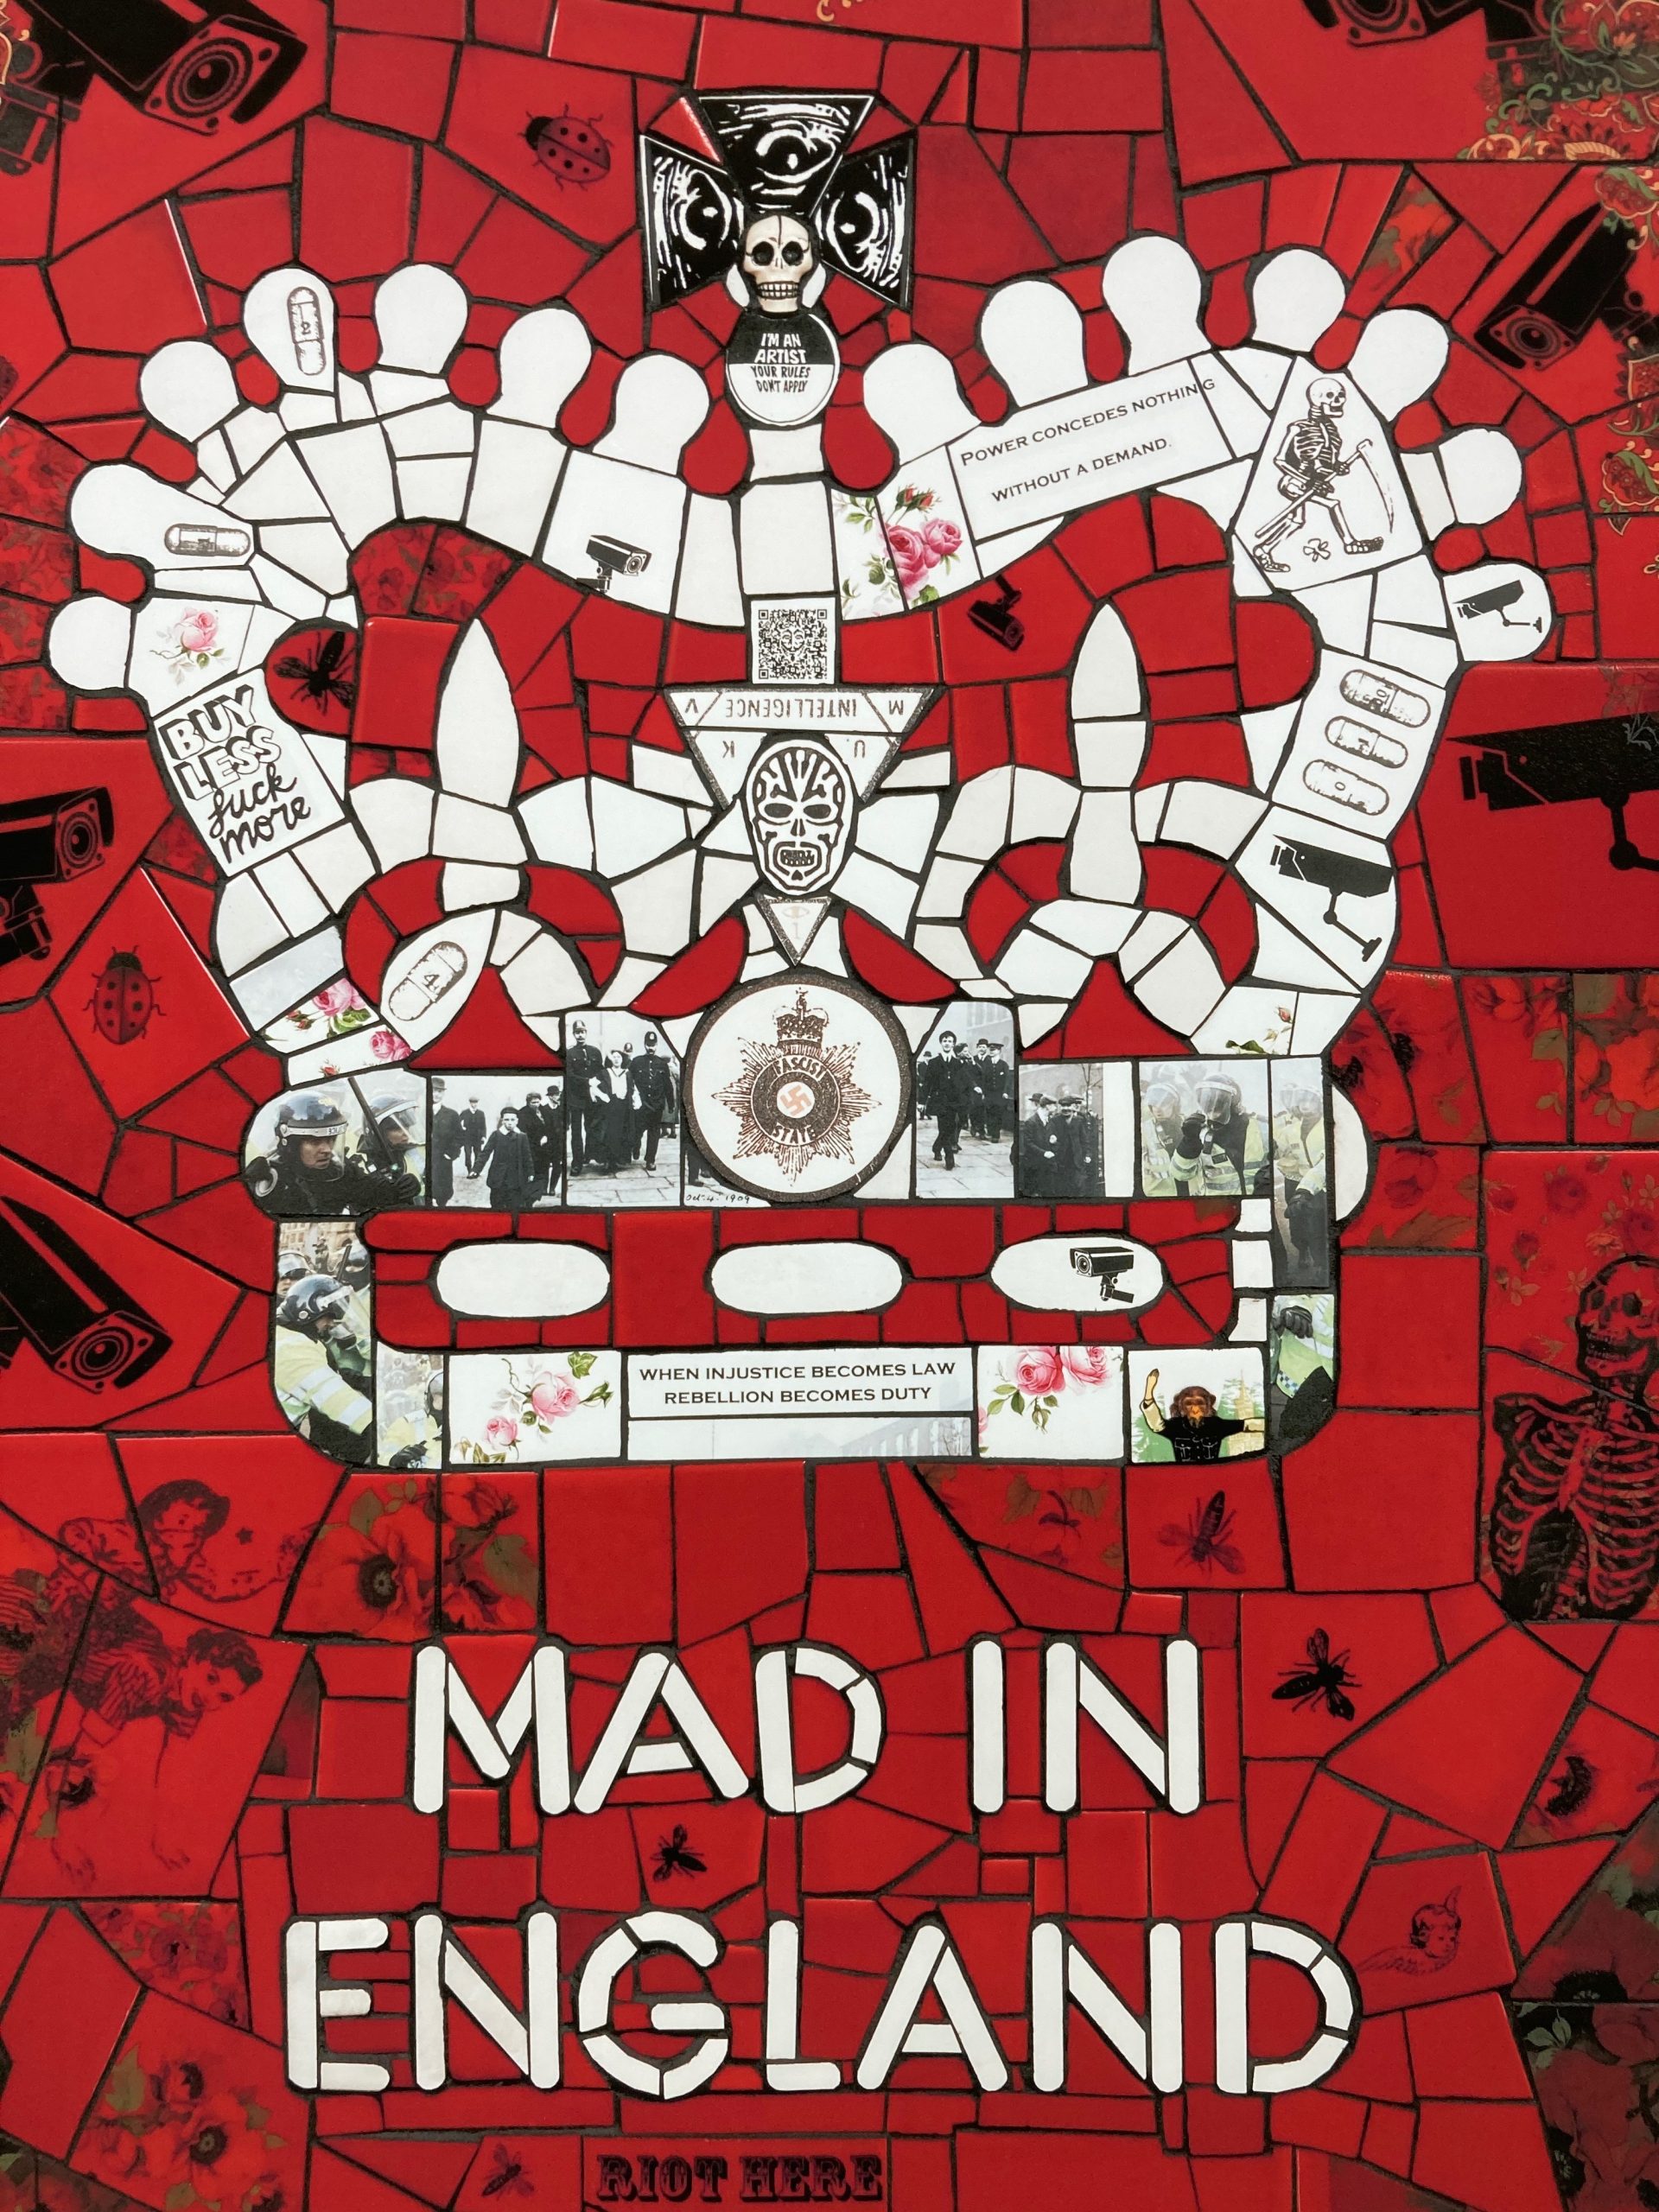 mad-in-england-mosaic